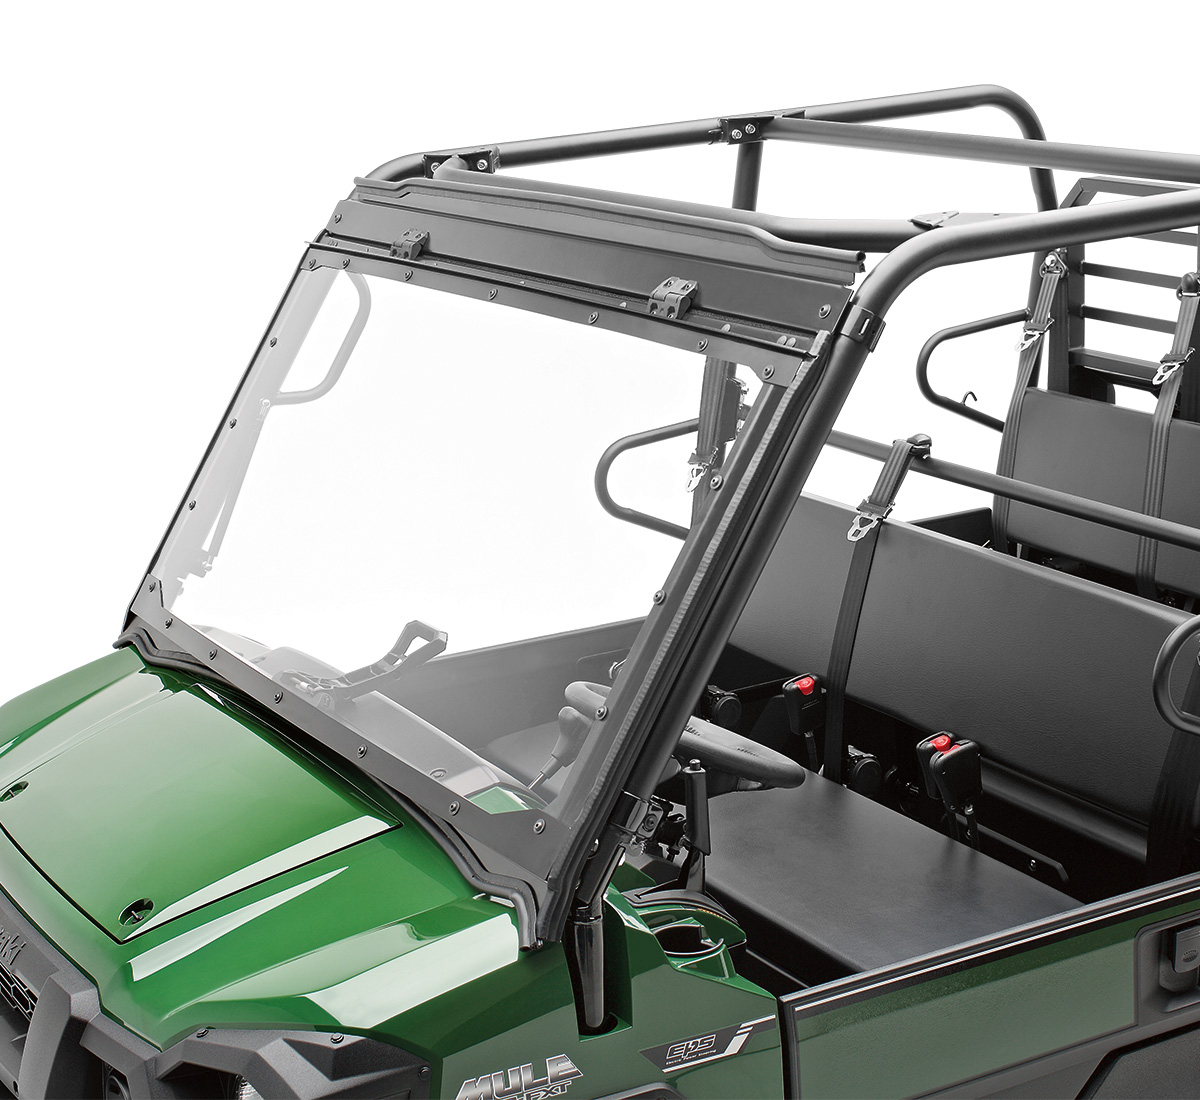 A&S AUDIO AND SHIELD DESIGNS KAWASAKI MULE 3000,3010 TRANS 4X4 FULL AND FLIP UP 1/4 POLYCARBONATE WINDSHIELD 